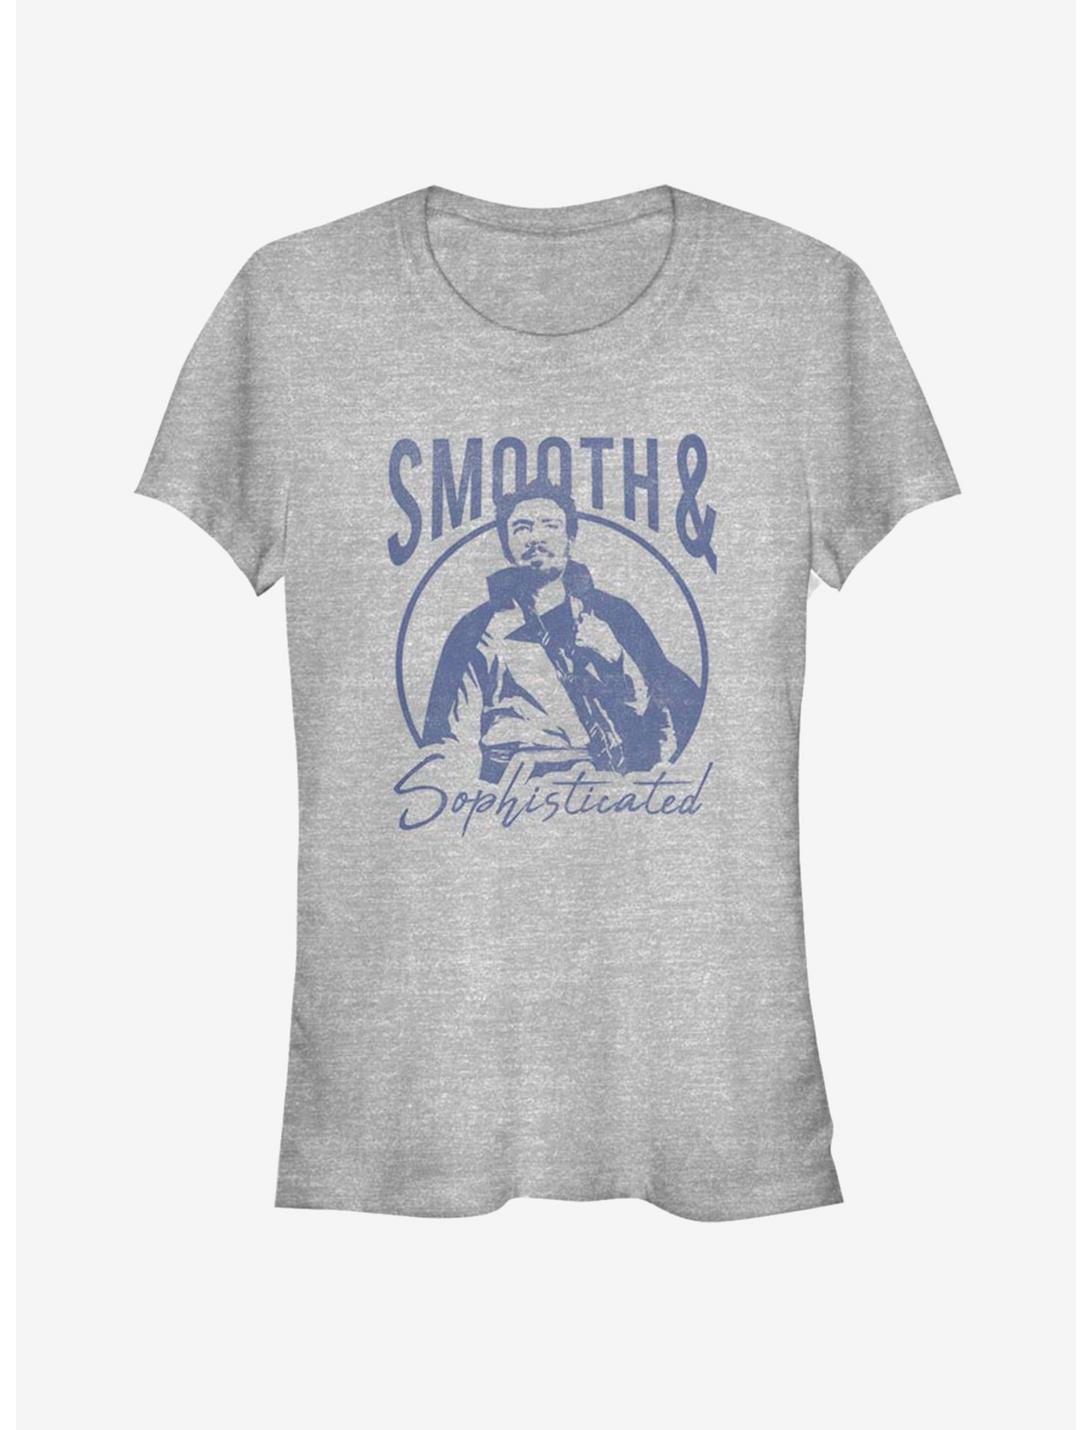 Star Wars Smooth and Sophisticated Girls T-Shirt, ATH HTR, hi-res